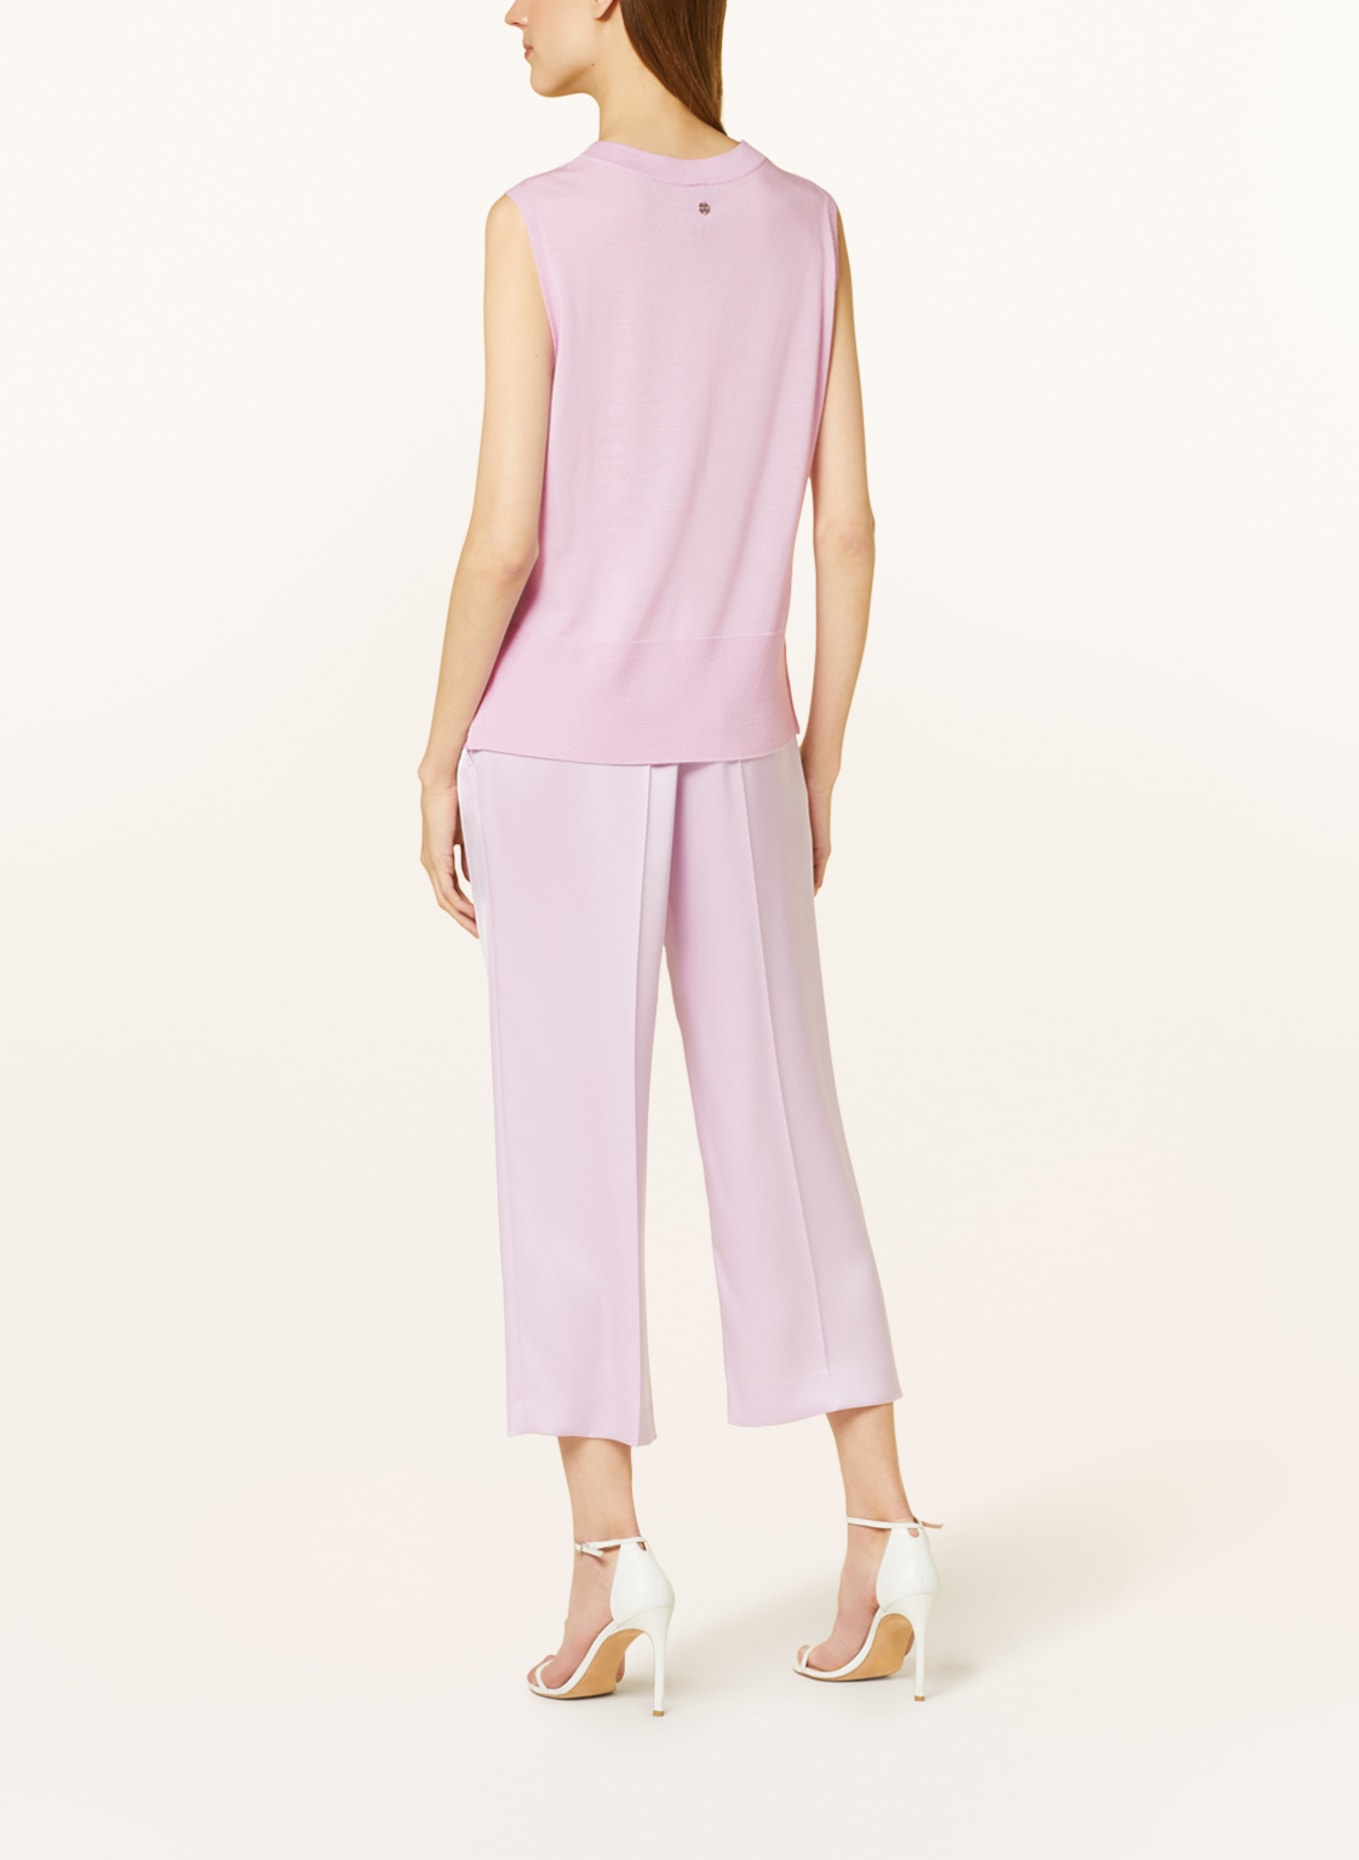 MARC CAIN Knit top with glitter thread, Color: 709 pink lavender (Image 3)